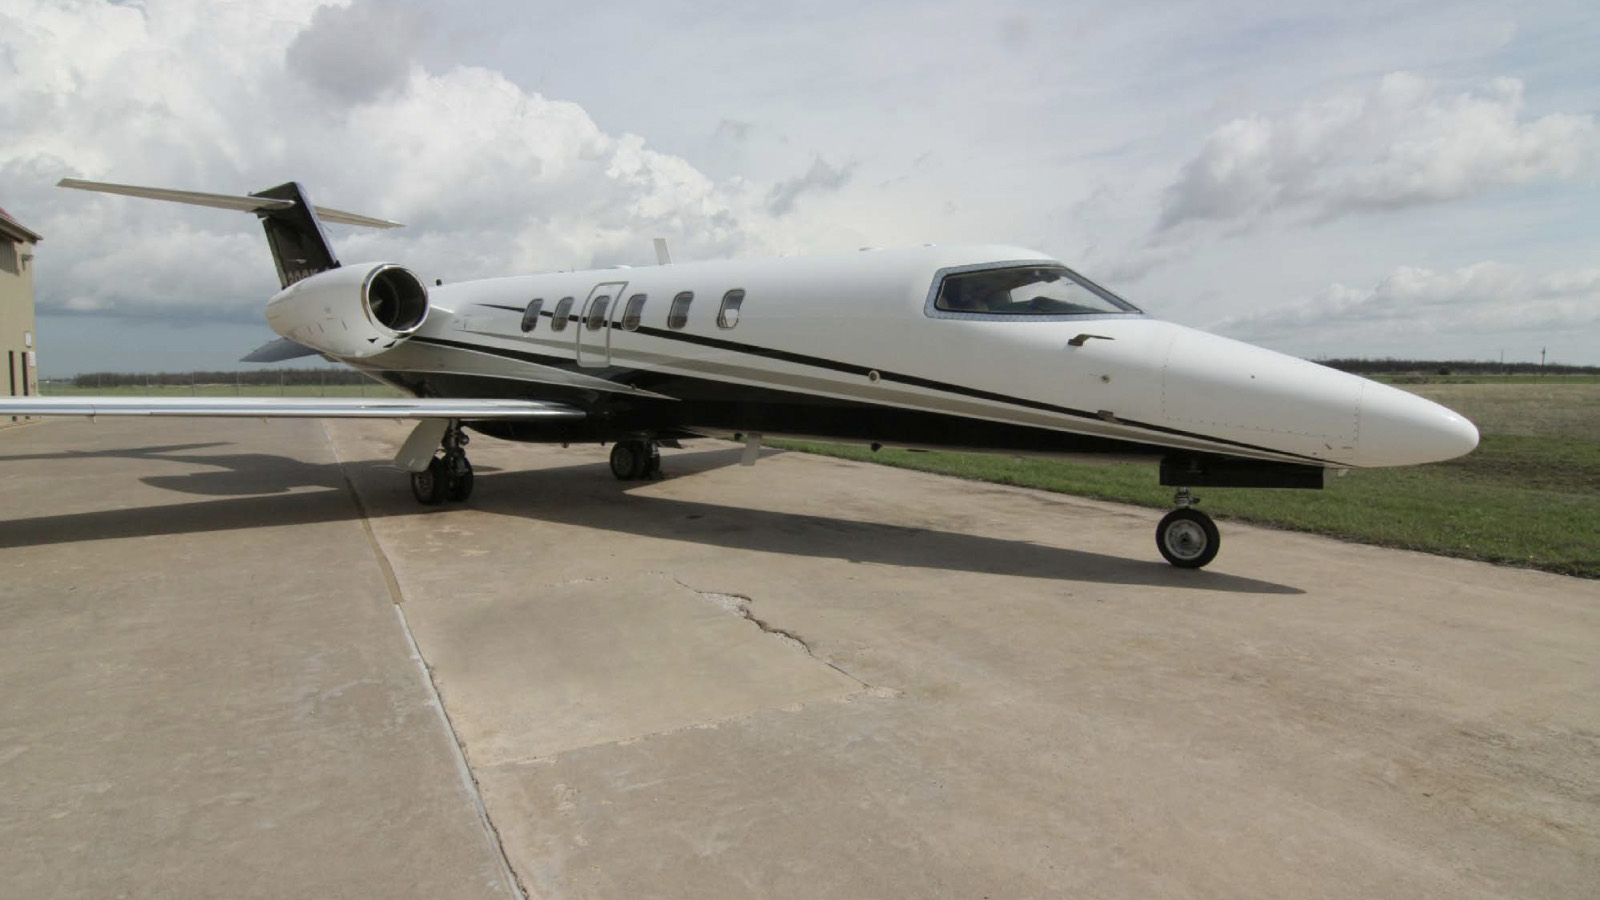 2006 Learjet 40XR Private Jet For Sale From Southern Cross On AvPay aircraft exterior front left